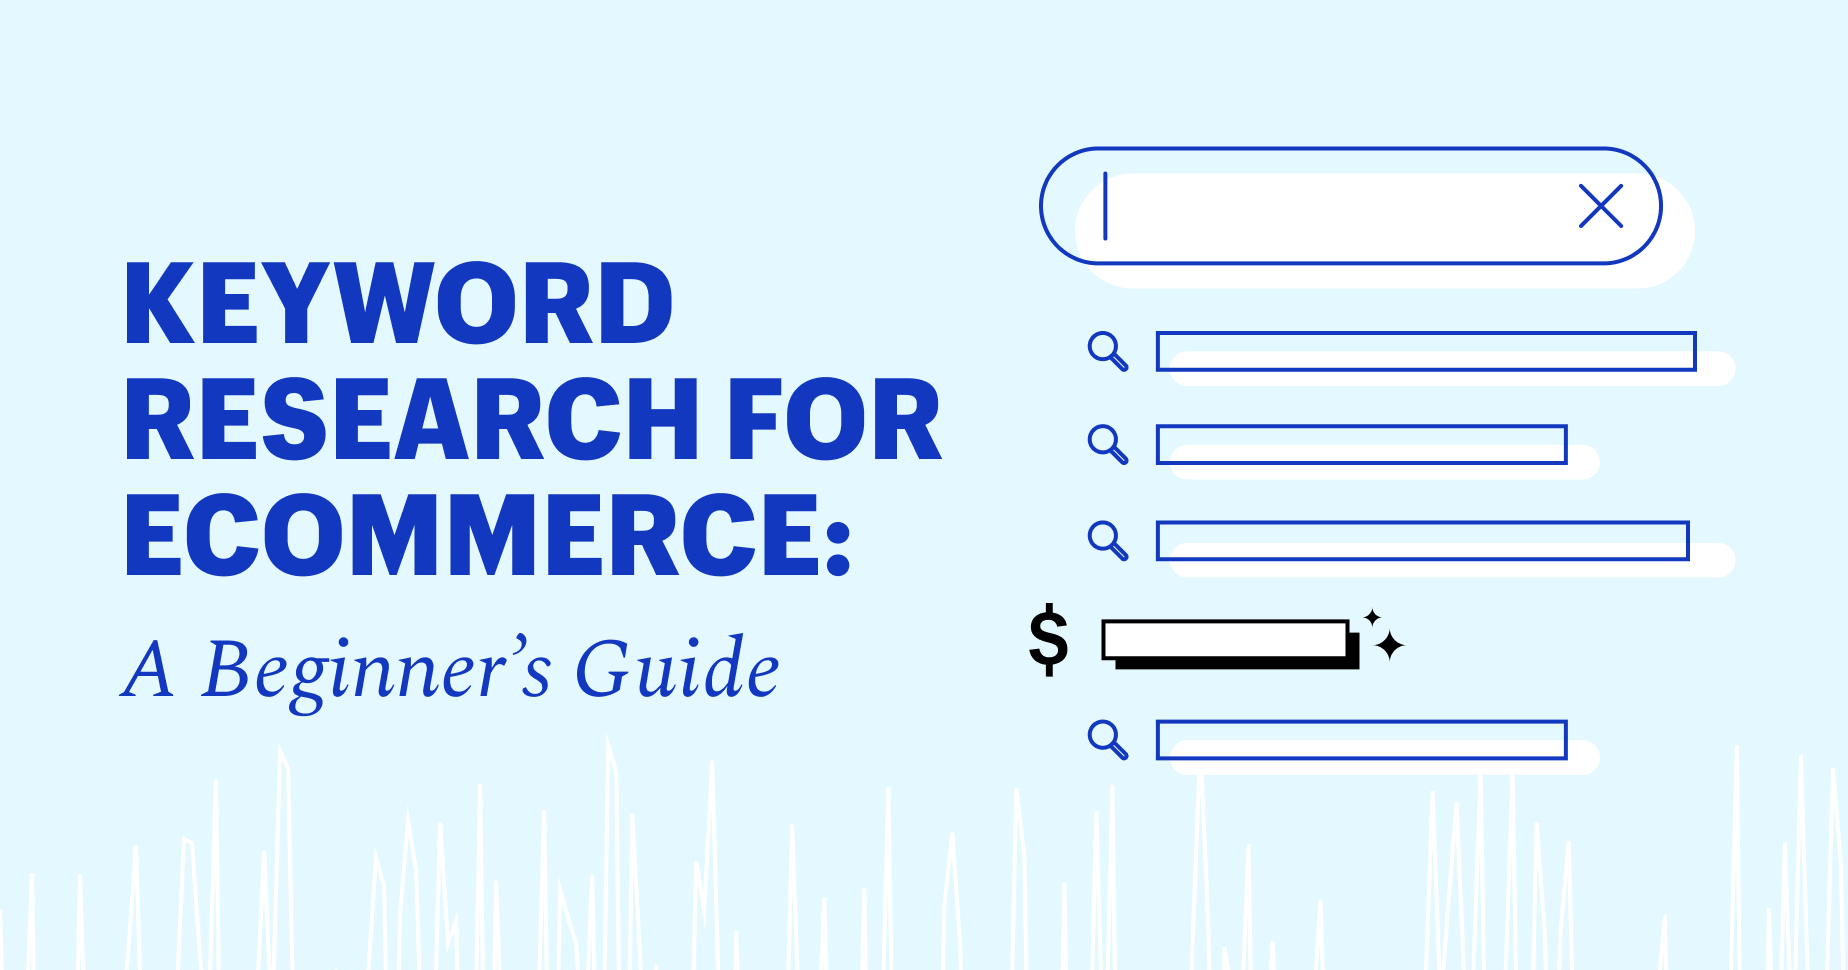 Keyword Research for Ecommerce: A Beginner's Guide